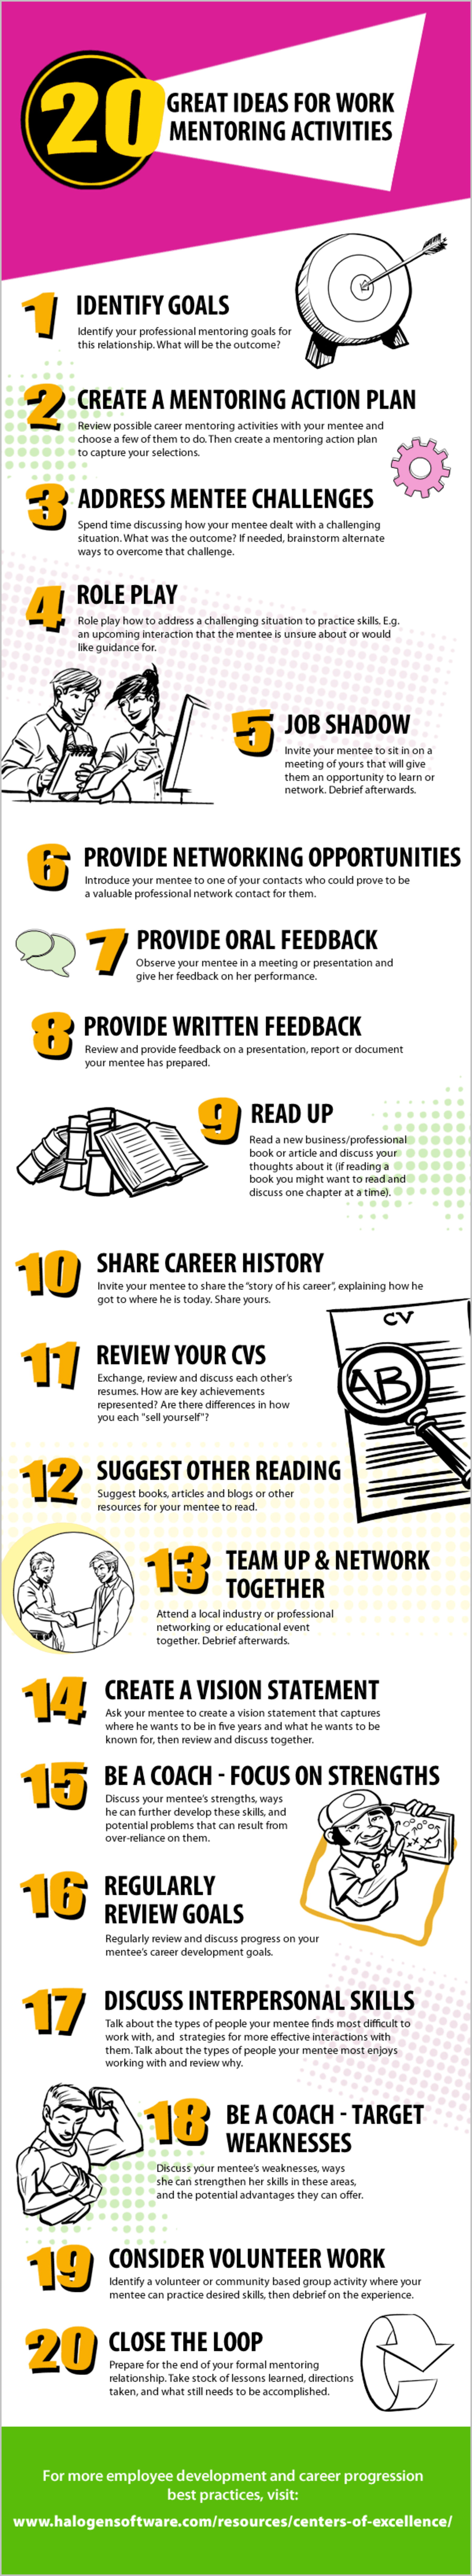 20 Great Ideas For Work Mentoring Activities Infographic